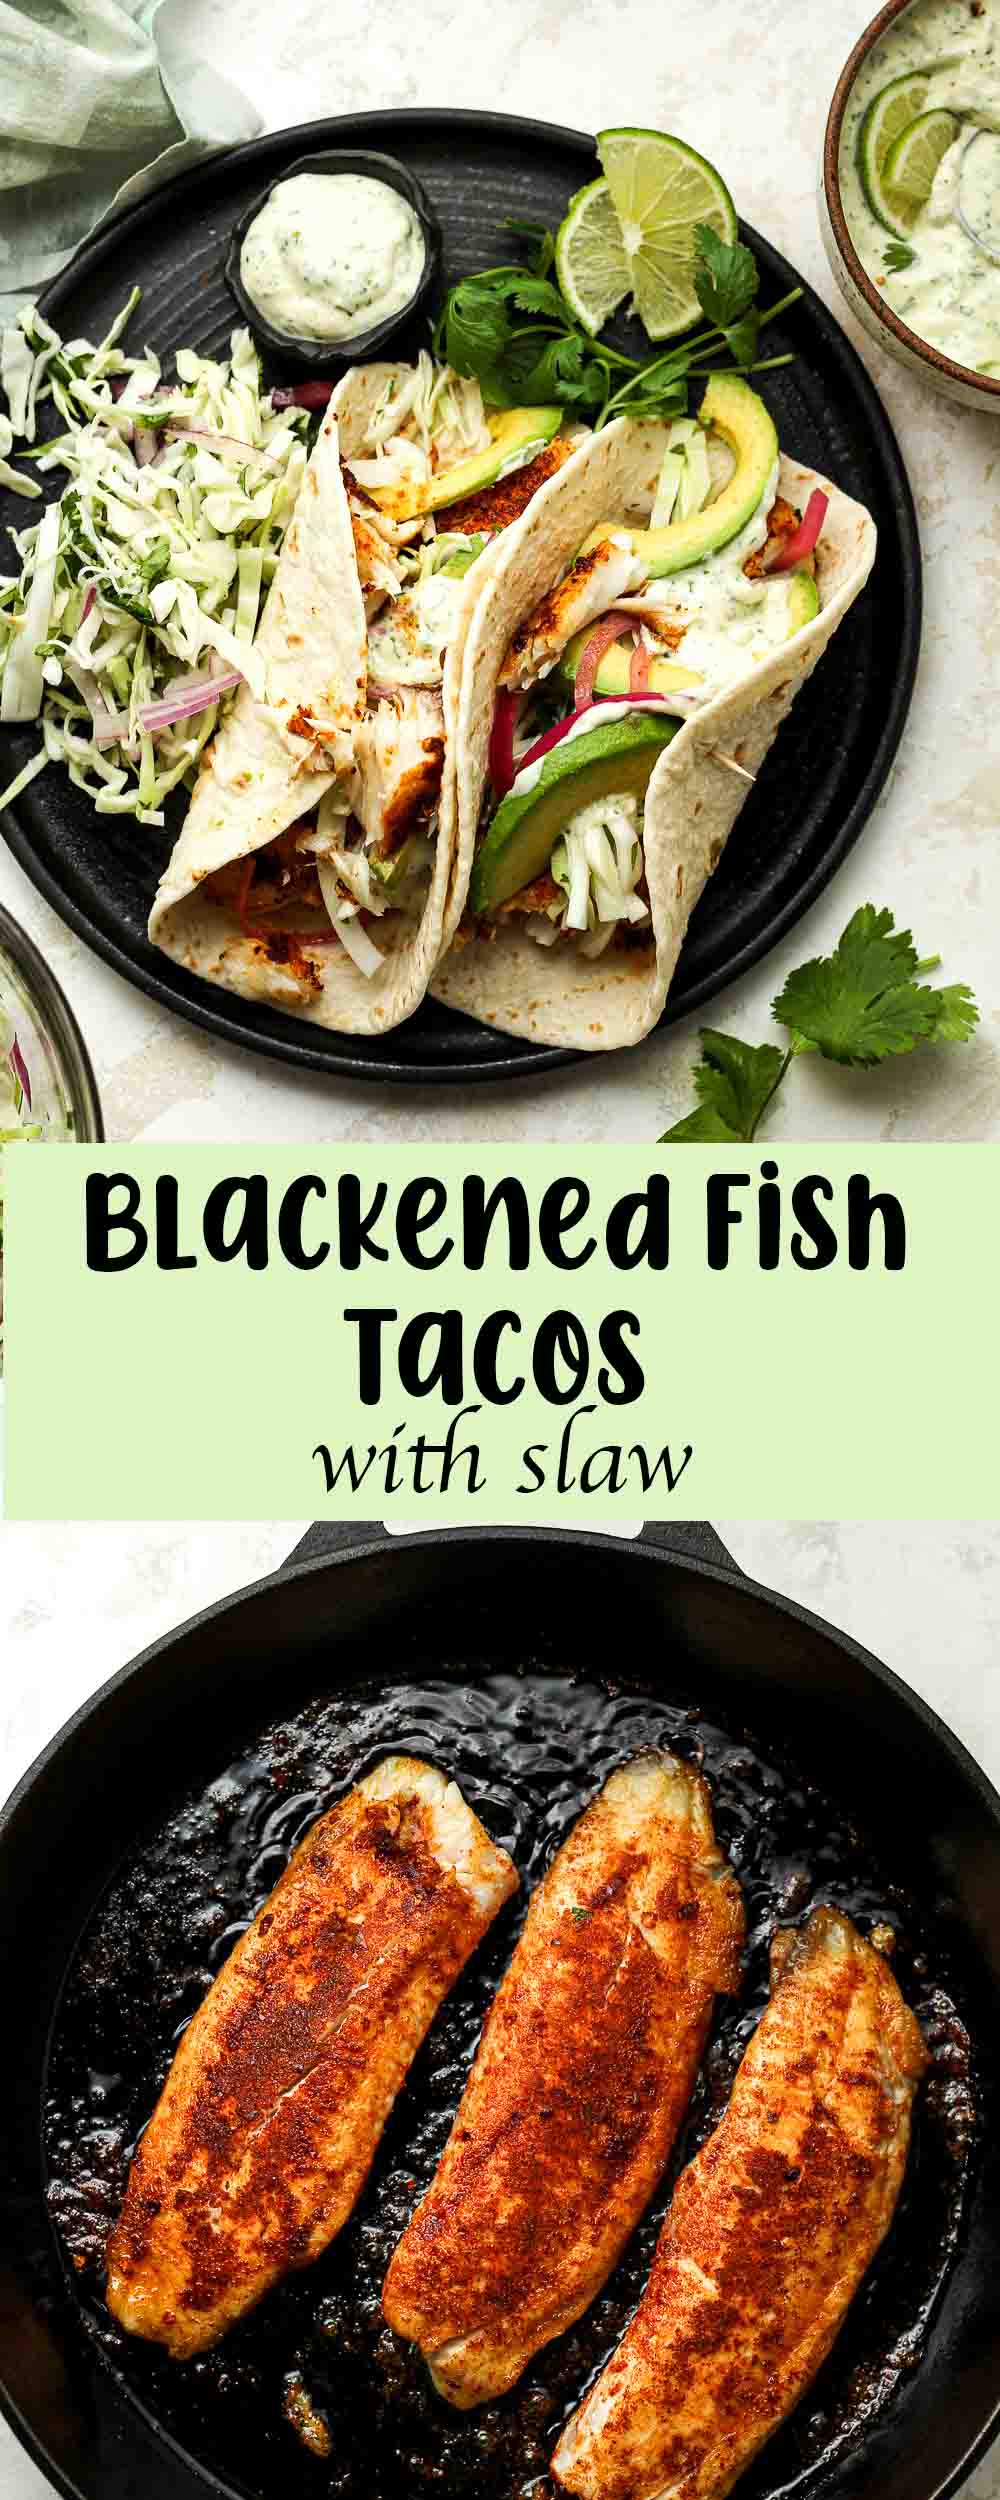 A collage of blackened fish tacos with slaw.